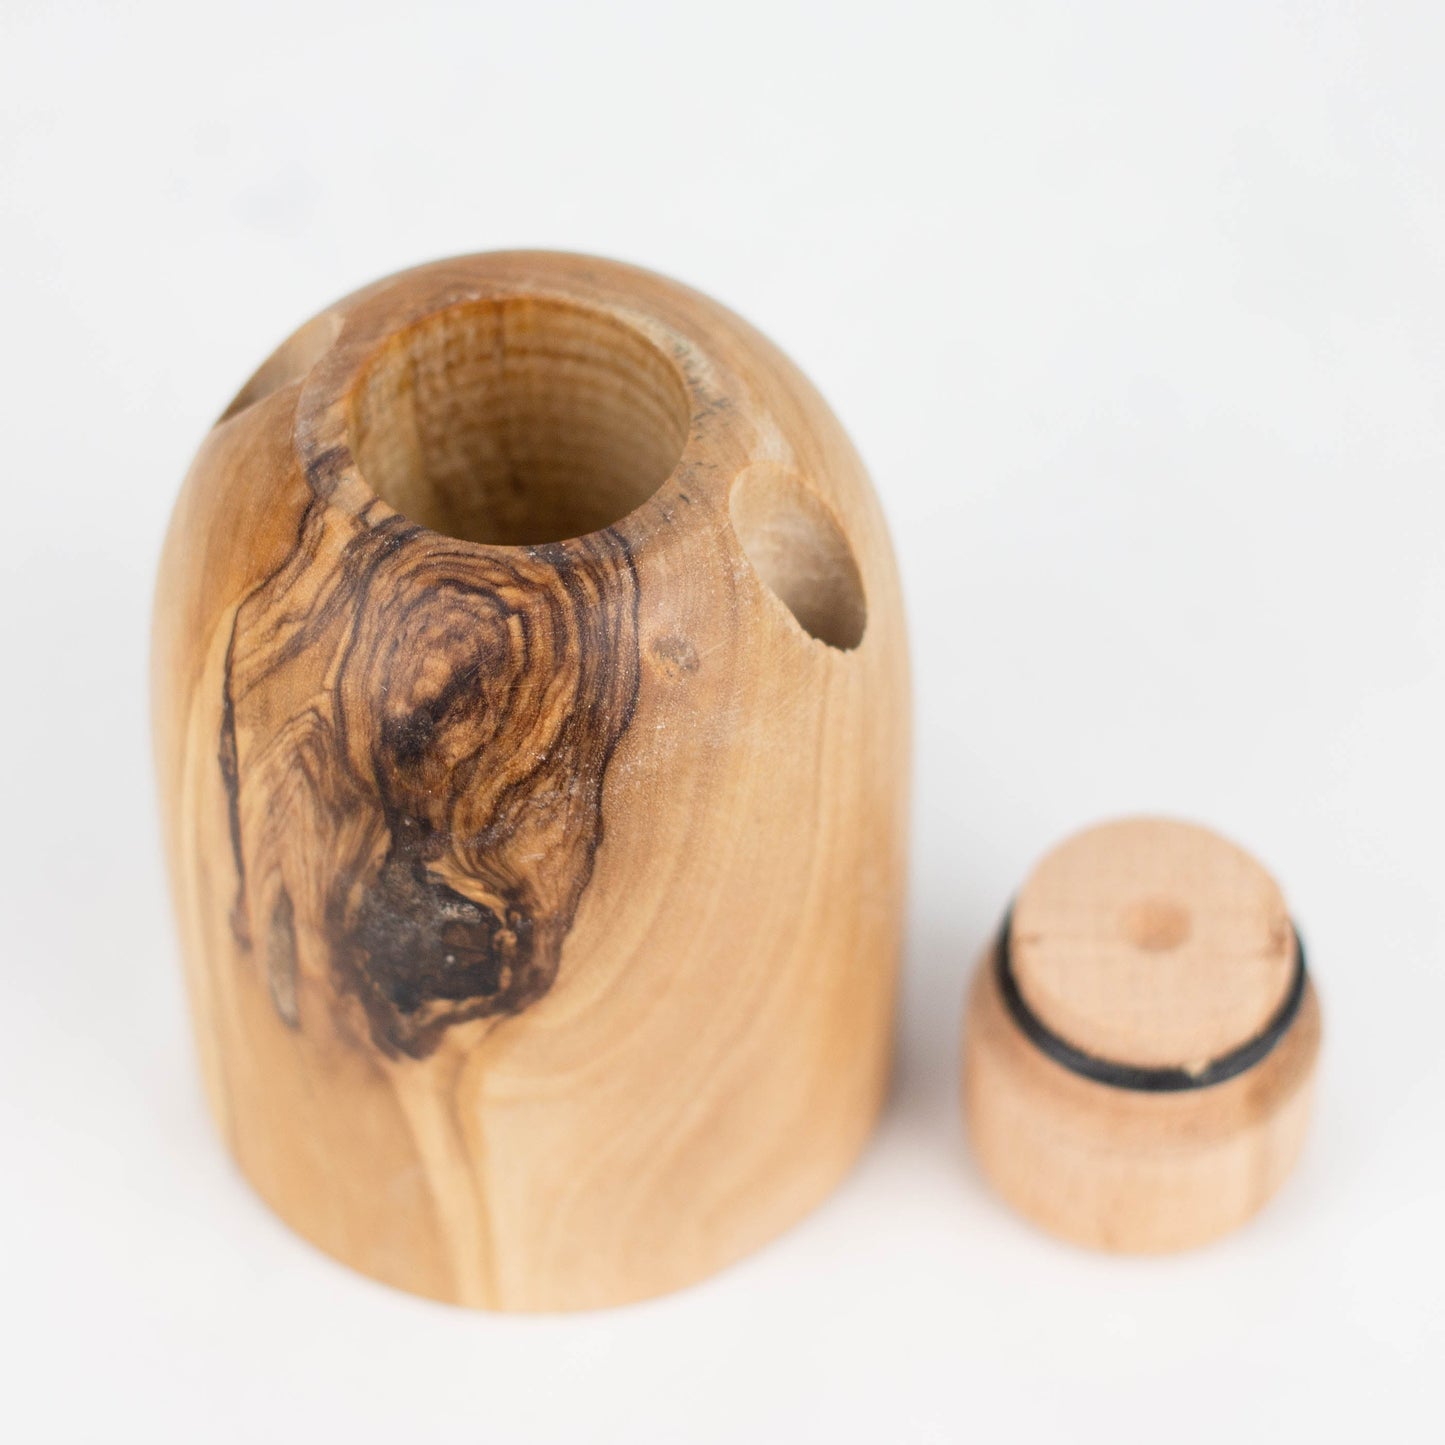 Olive wood tabletop Dugout/One hitter stash Box/Smoker's Gift_3